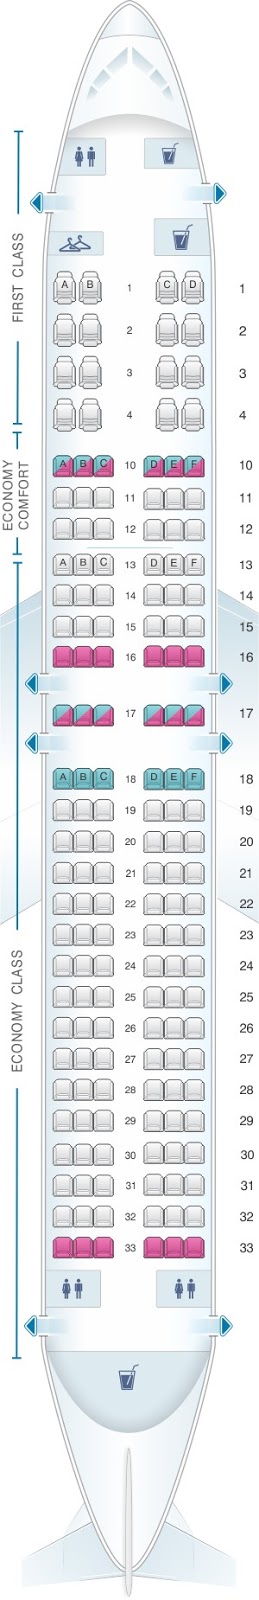 Delta Airlines Seating Chart